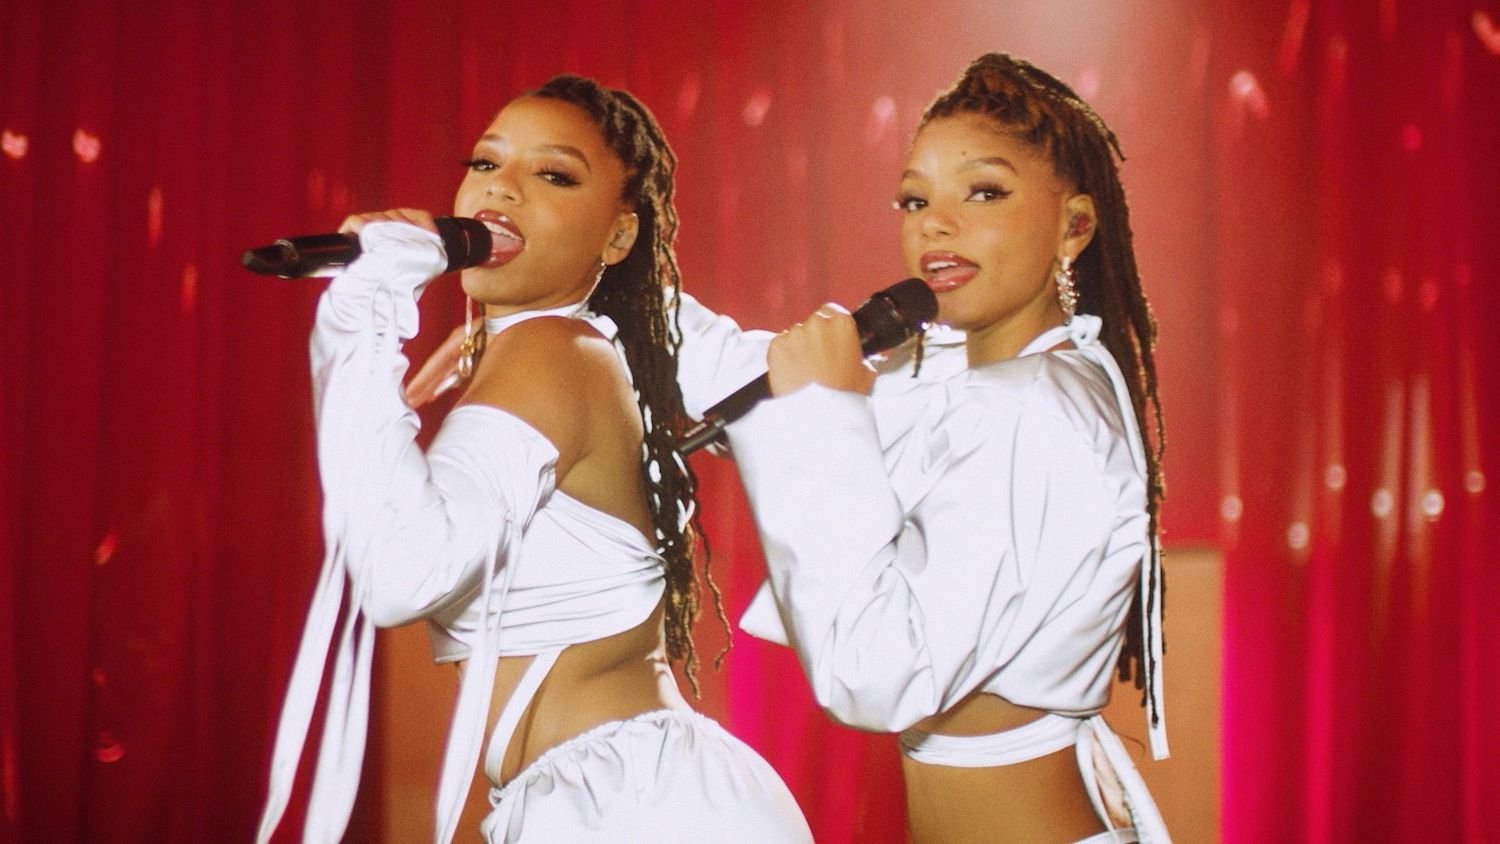 Are Chloe x Halle Really Twins?